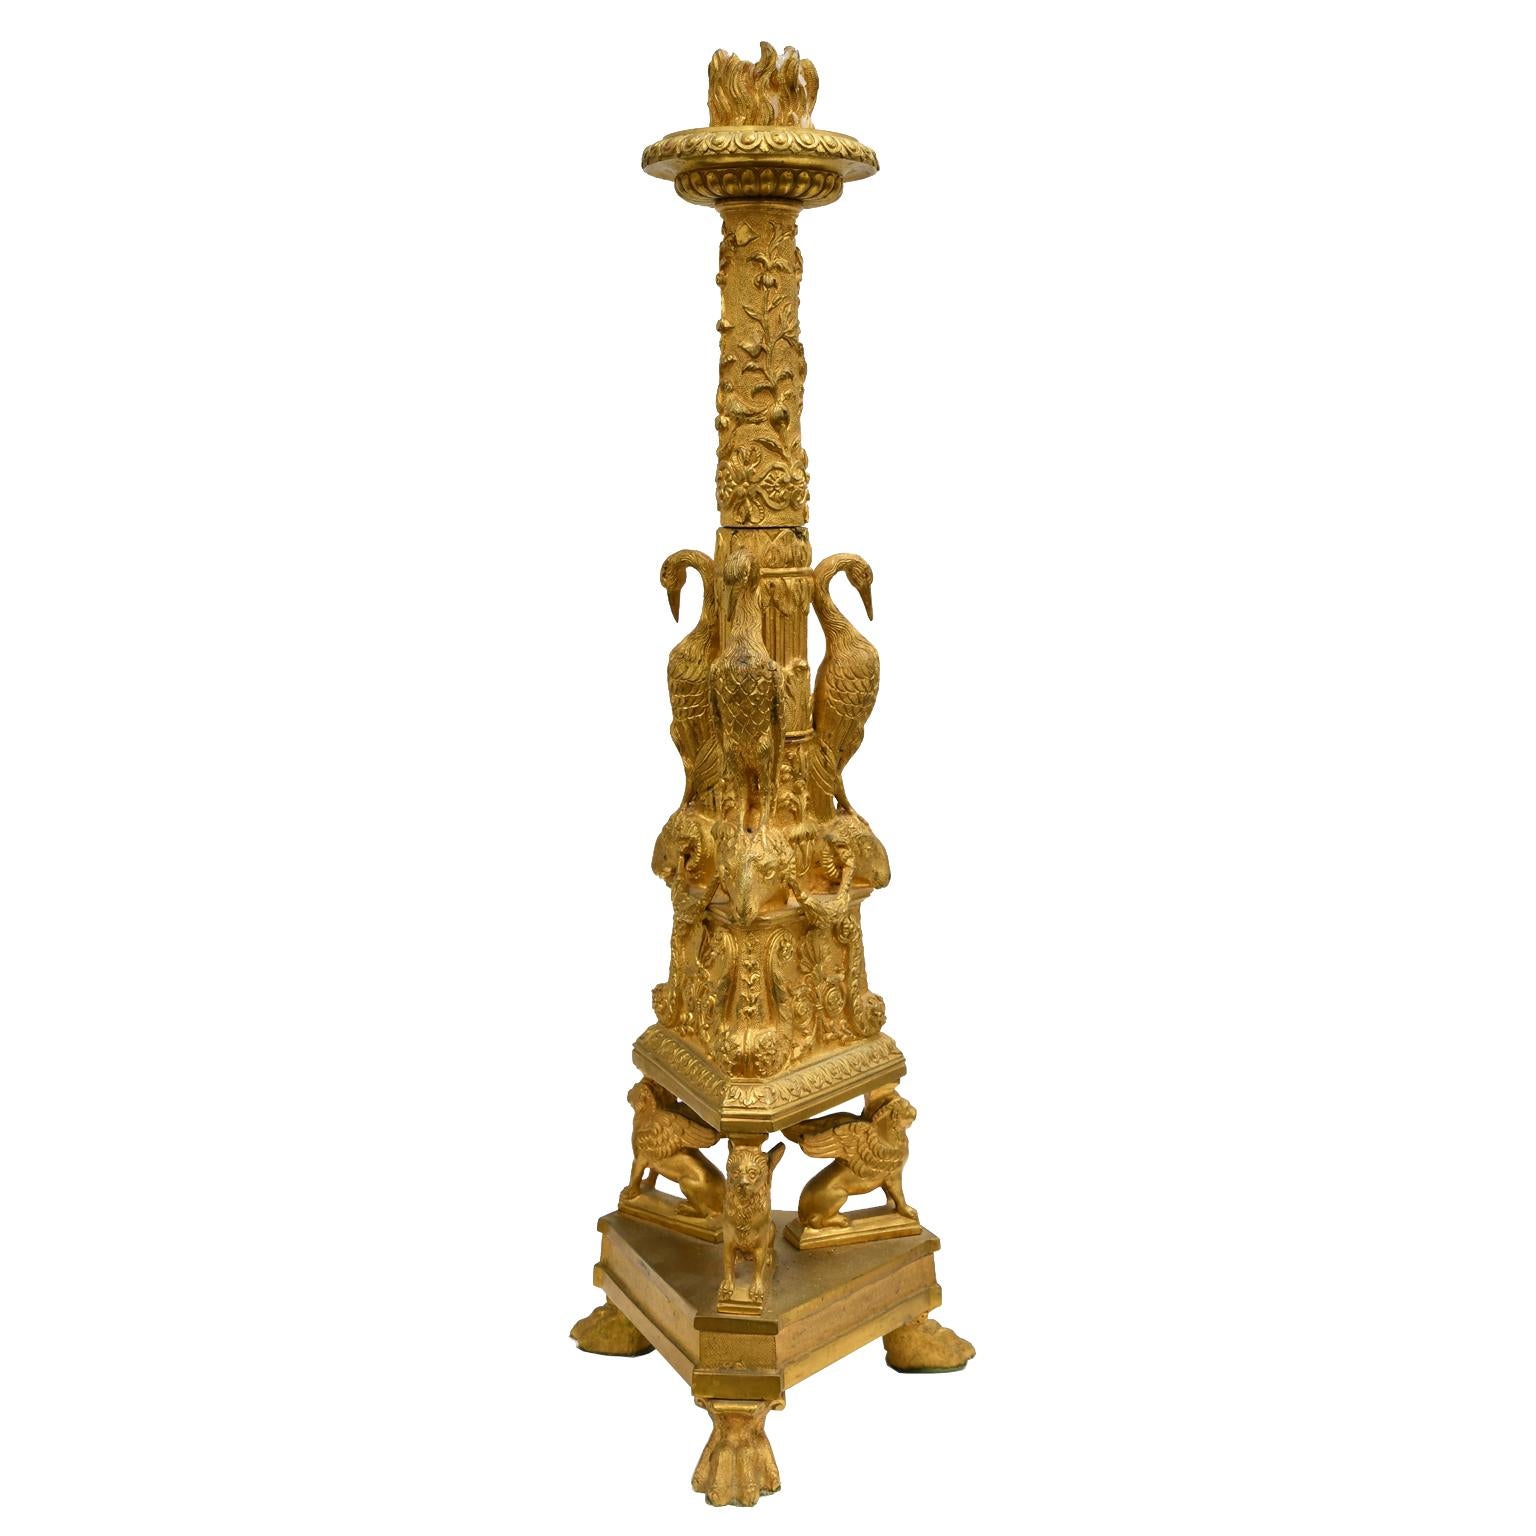 Cast Pair of Italian Neoclassical Gilded Candlesticks Based on Design by Piranesi